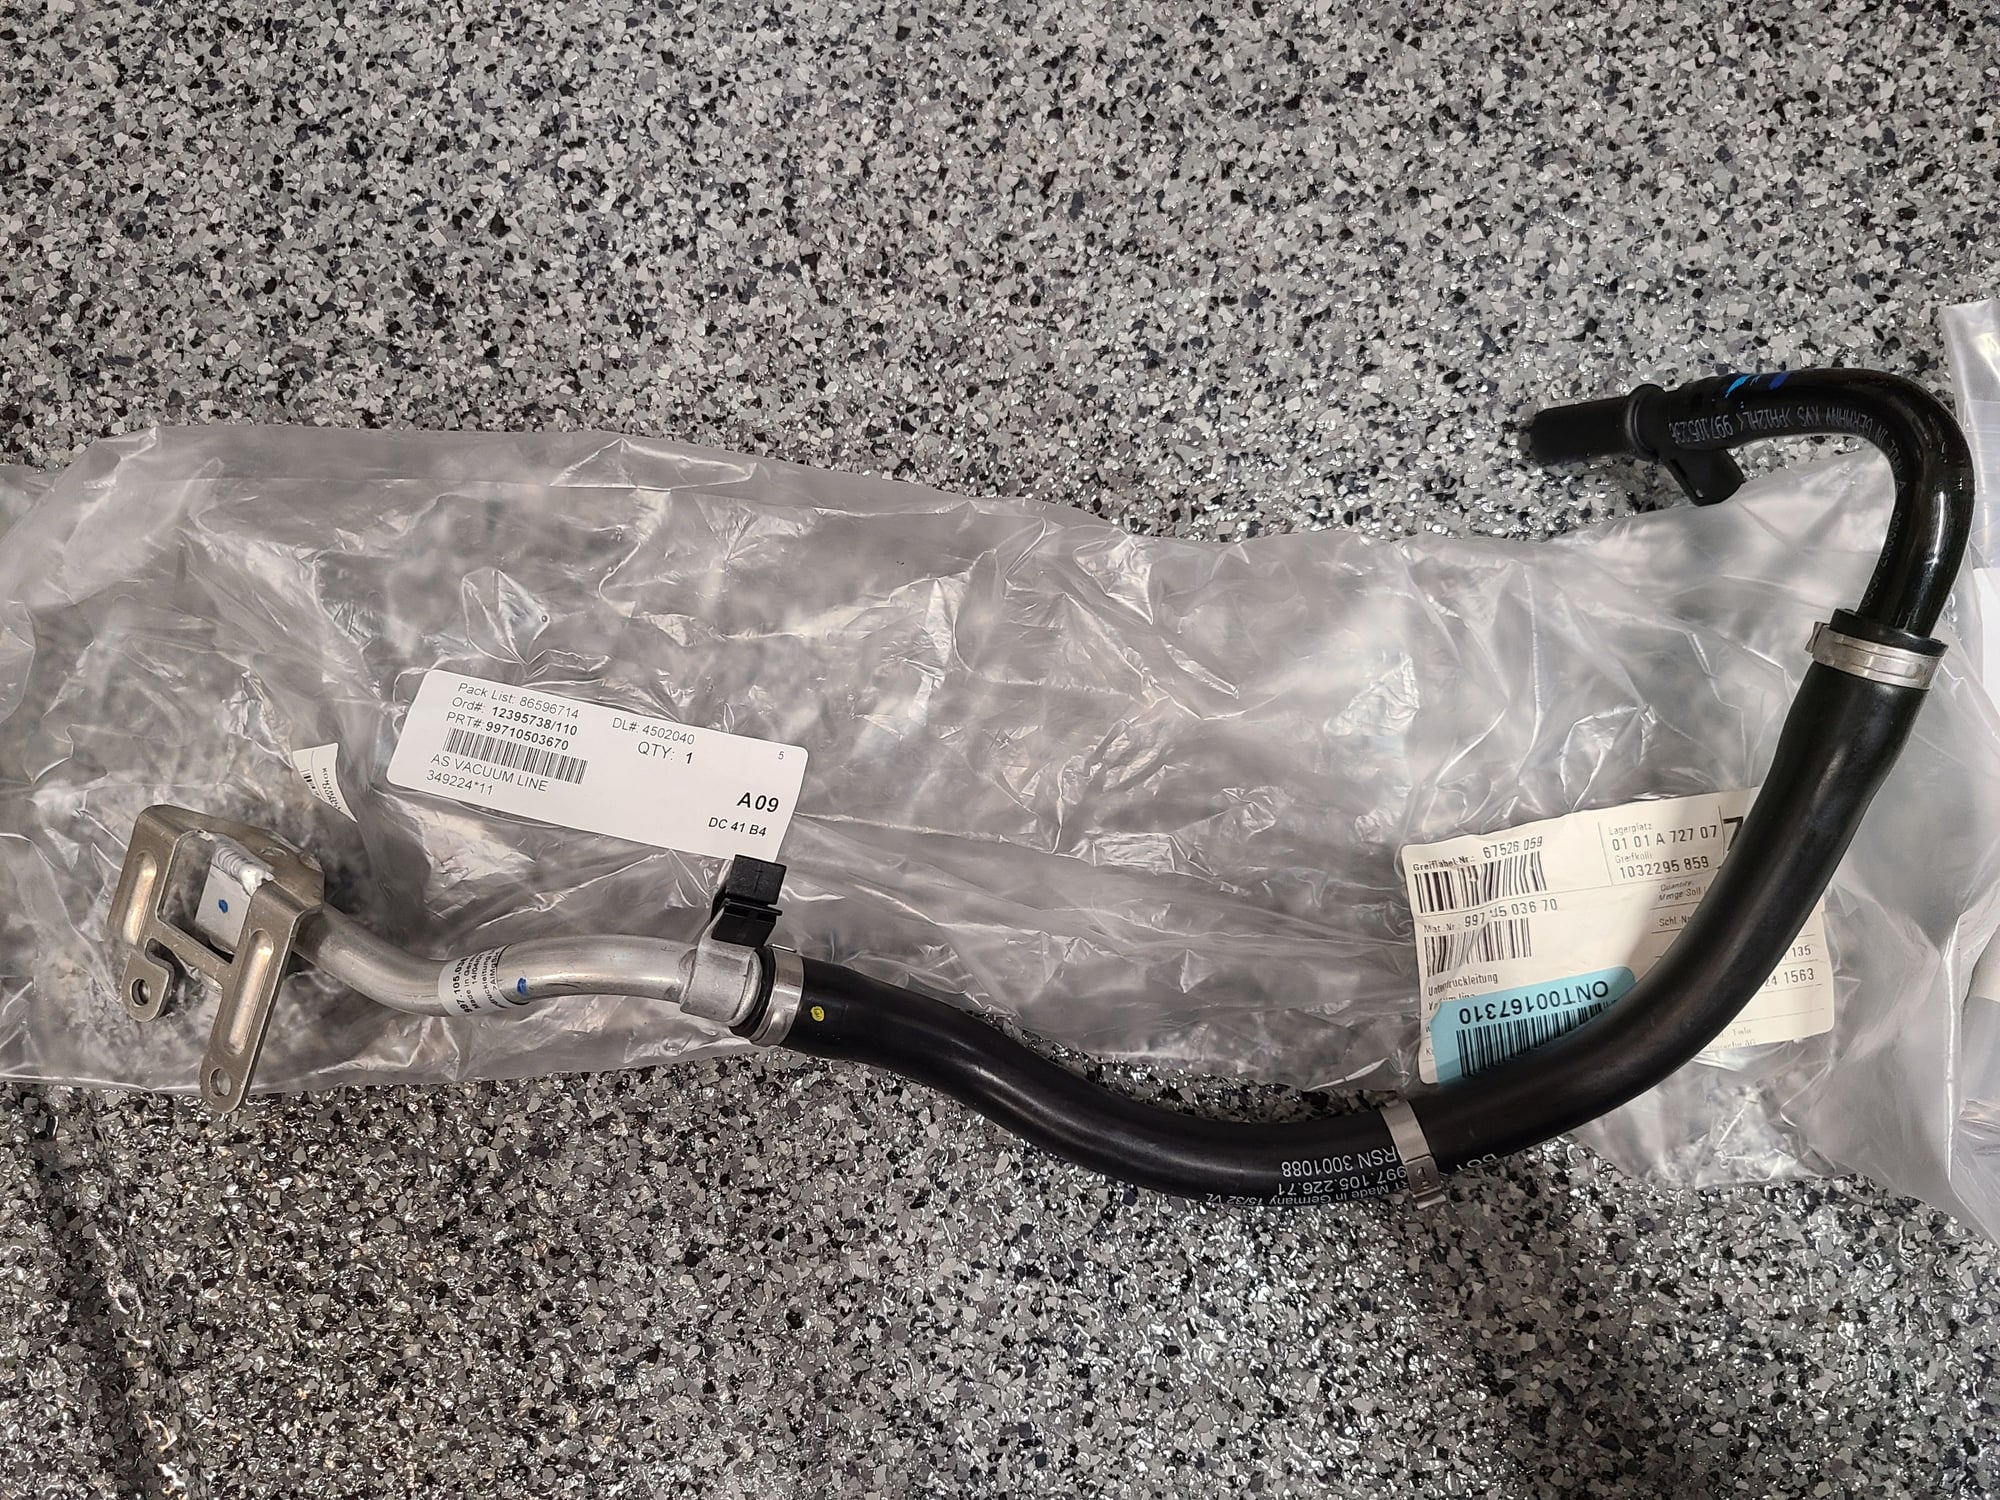 Engine - Internals - FS: Cam Driven Vacuum Pump - Fits all Mezger GT3 Engines - Upgrade for 996/997.1 GT3 - New - 2004 to 2012 Porsche GT3 - Fort Collins, CO 80525, United States